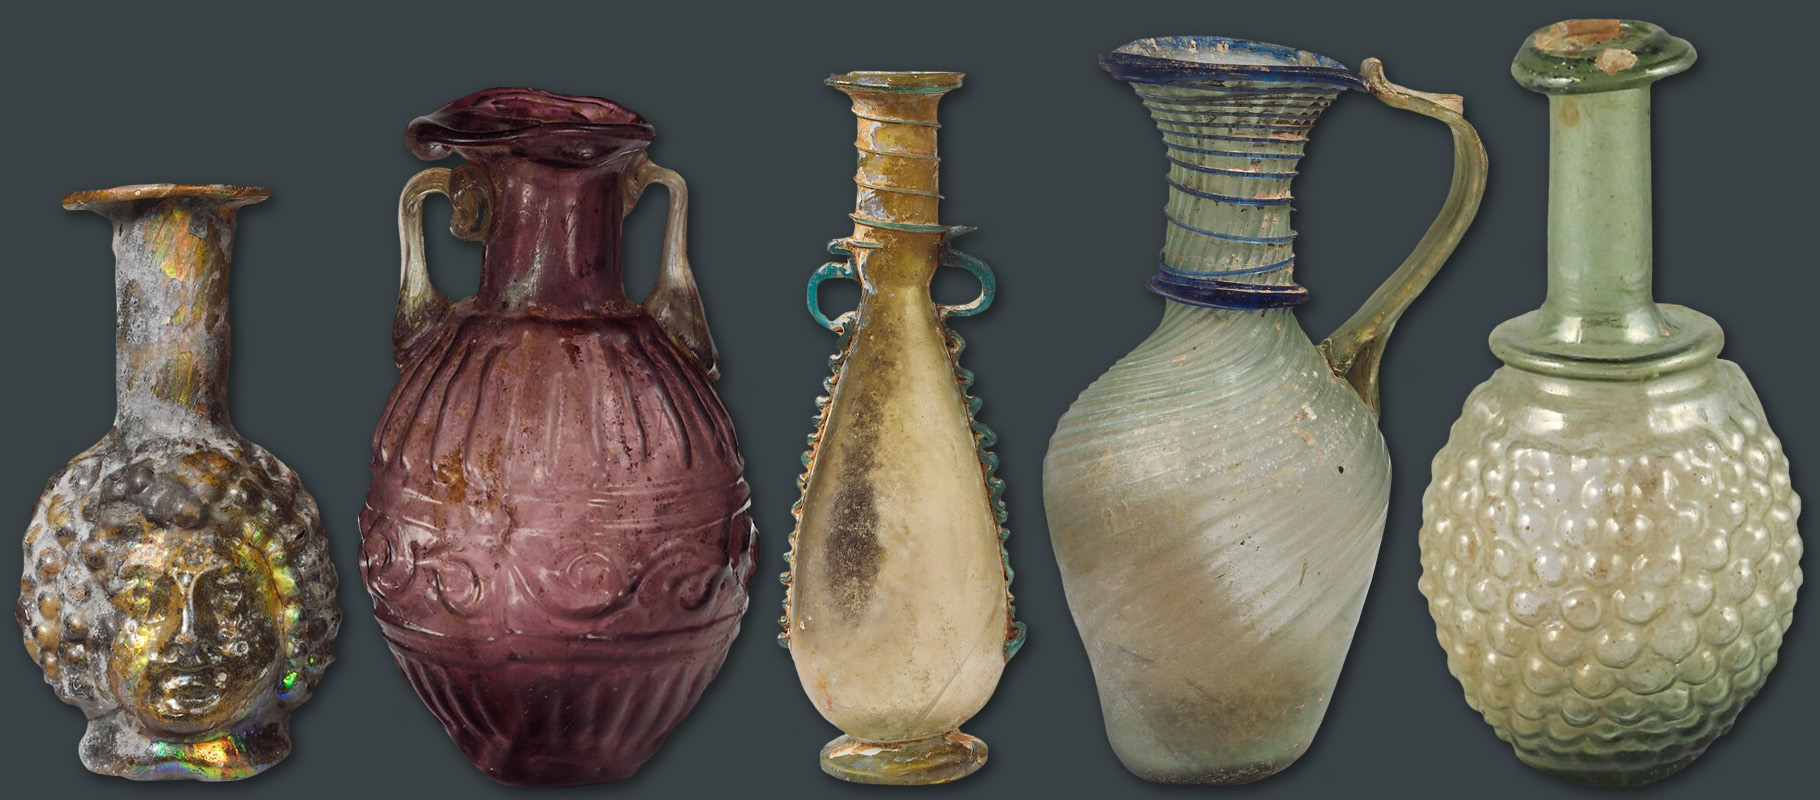 Syrian glass examples